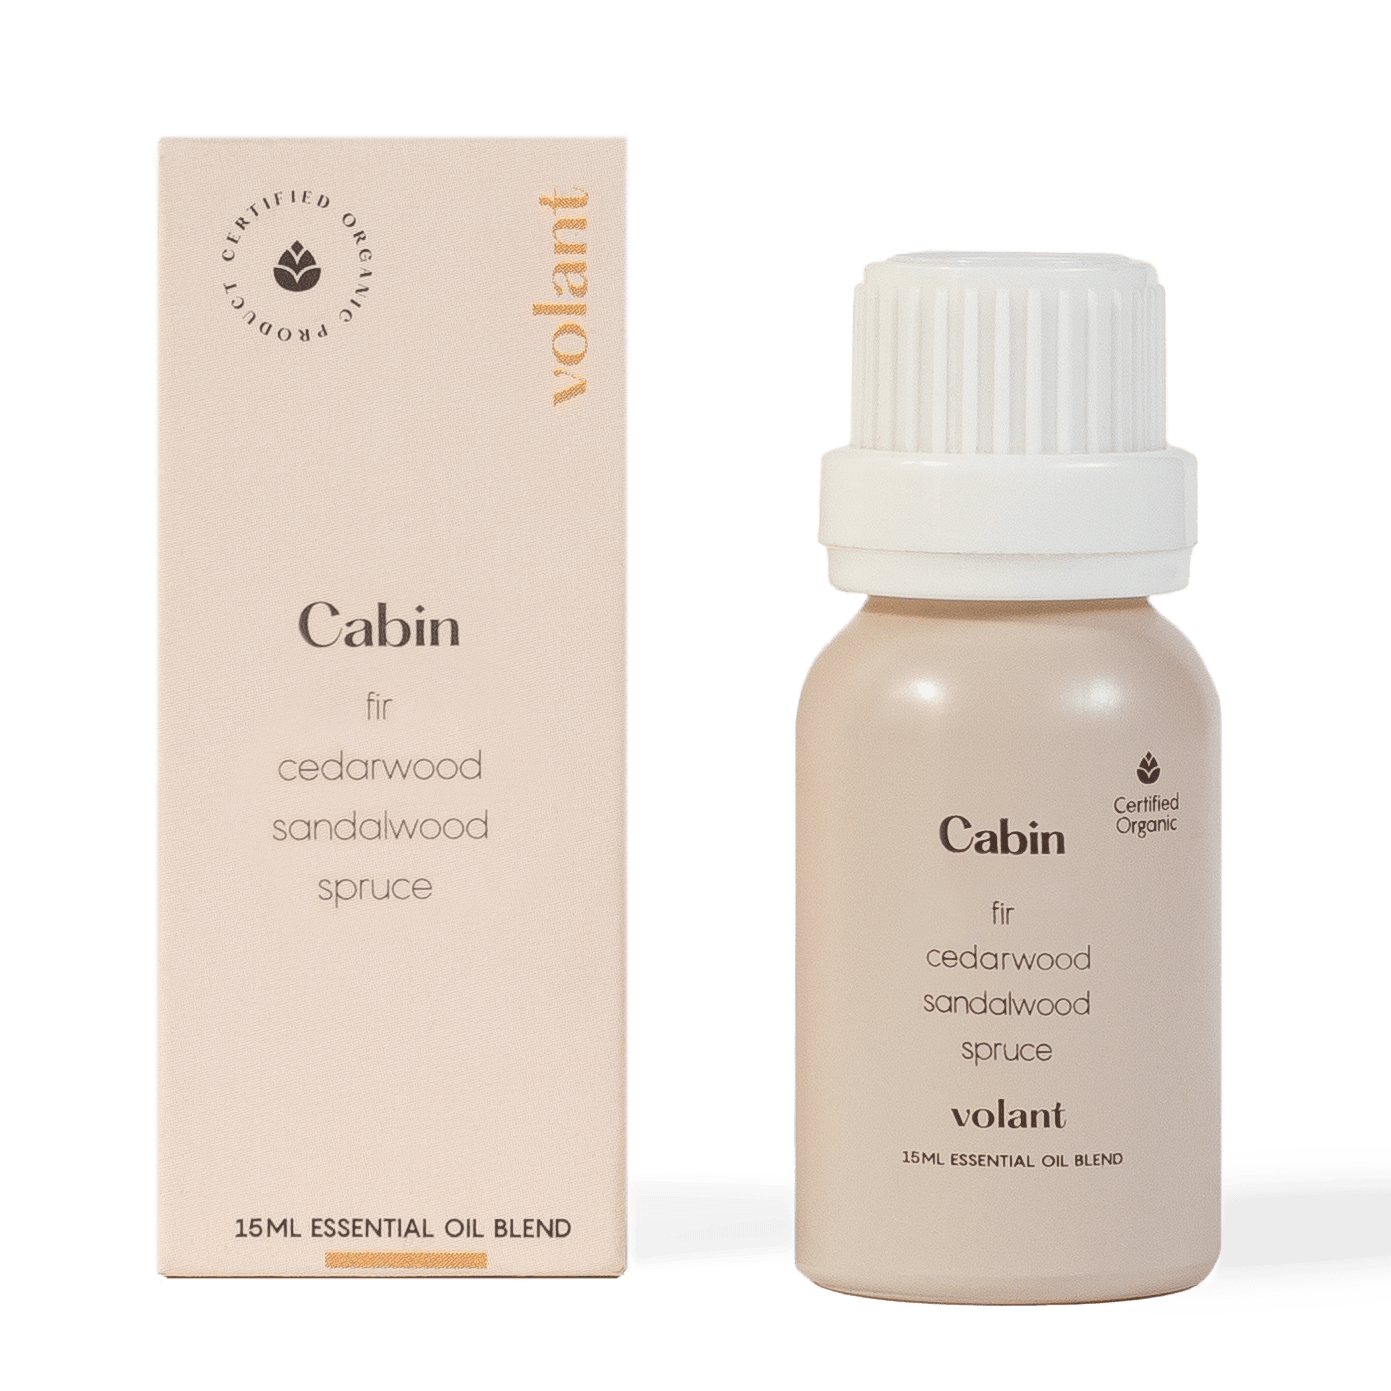 volant cabin essential oil blend bottle packaging made with fresh Fir, Cedarwood, Spruce, and Sandalwood